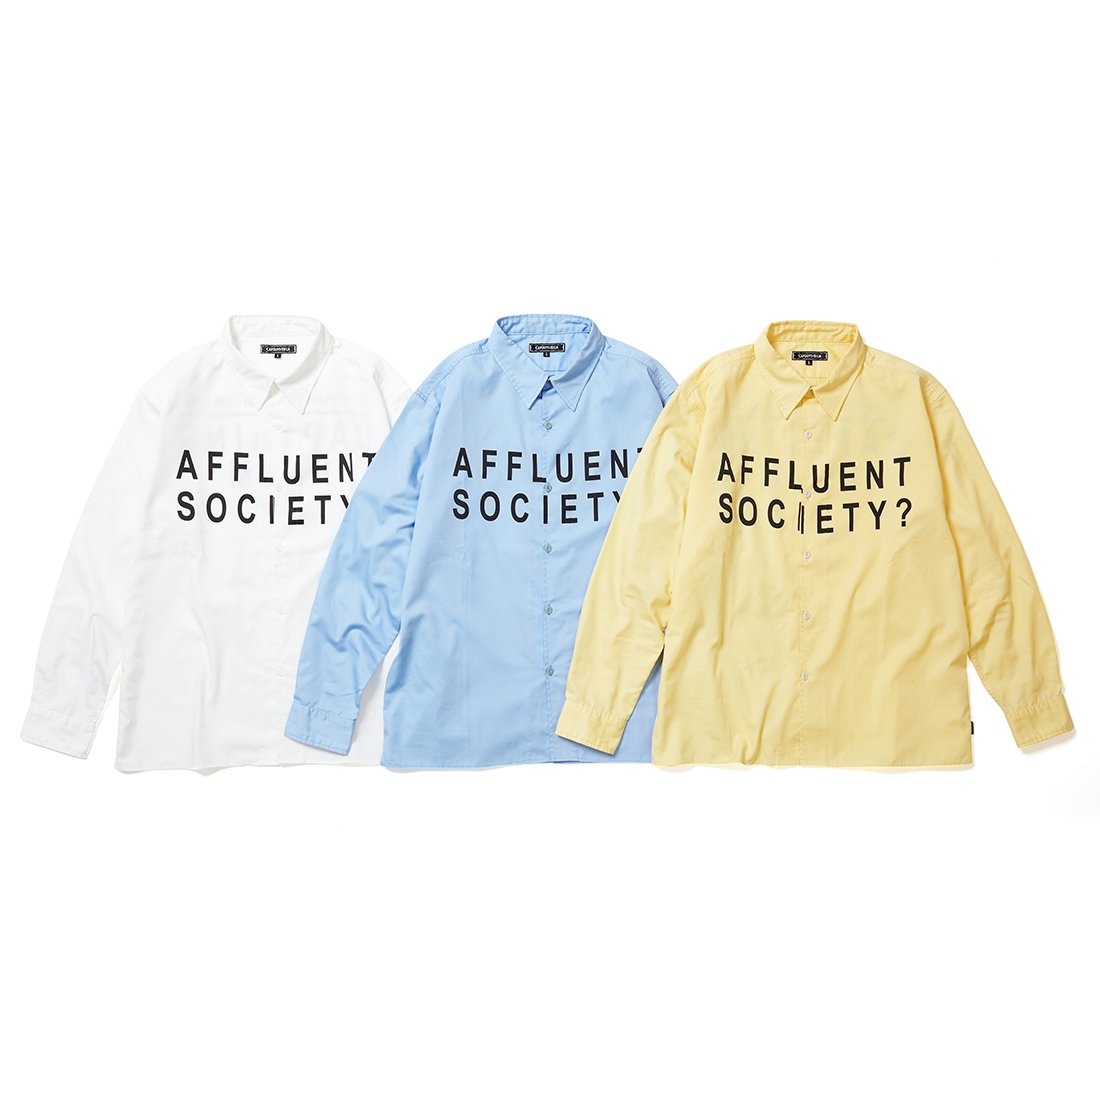 CAPTAINS HELM #AFFLUENT SOCIETY WORK SHIRTS - CAPTAINS HELM WEB STORE